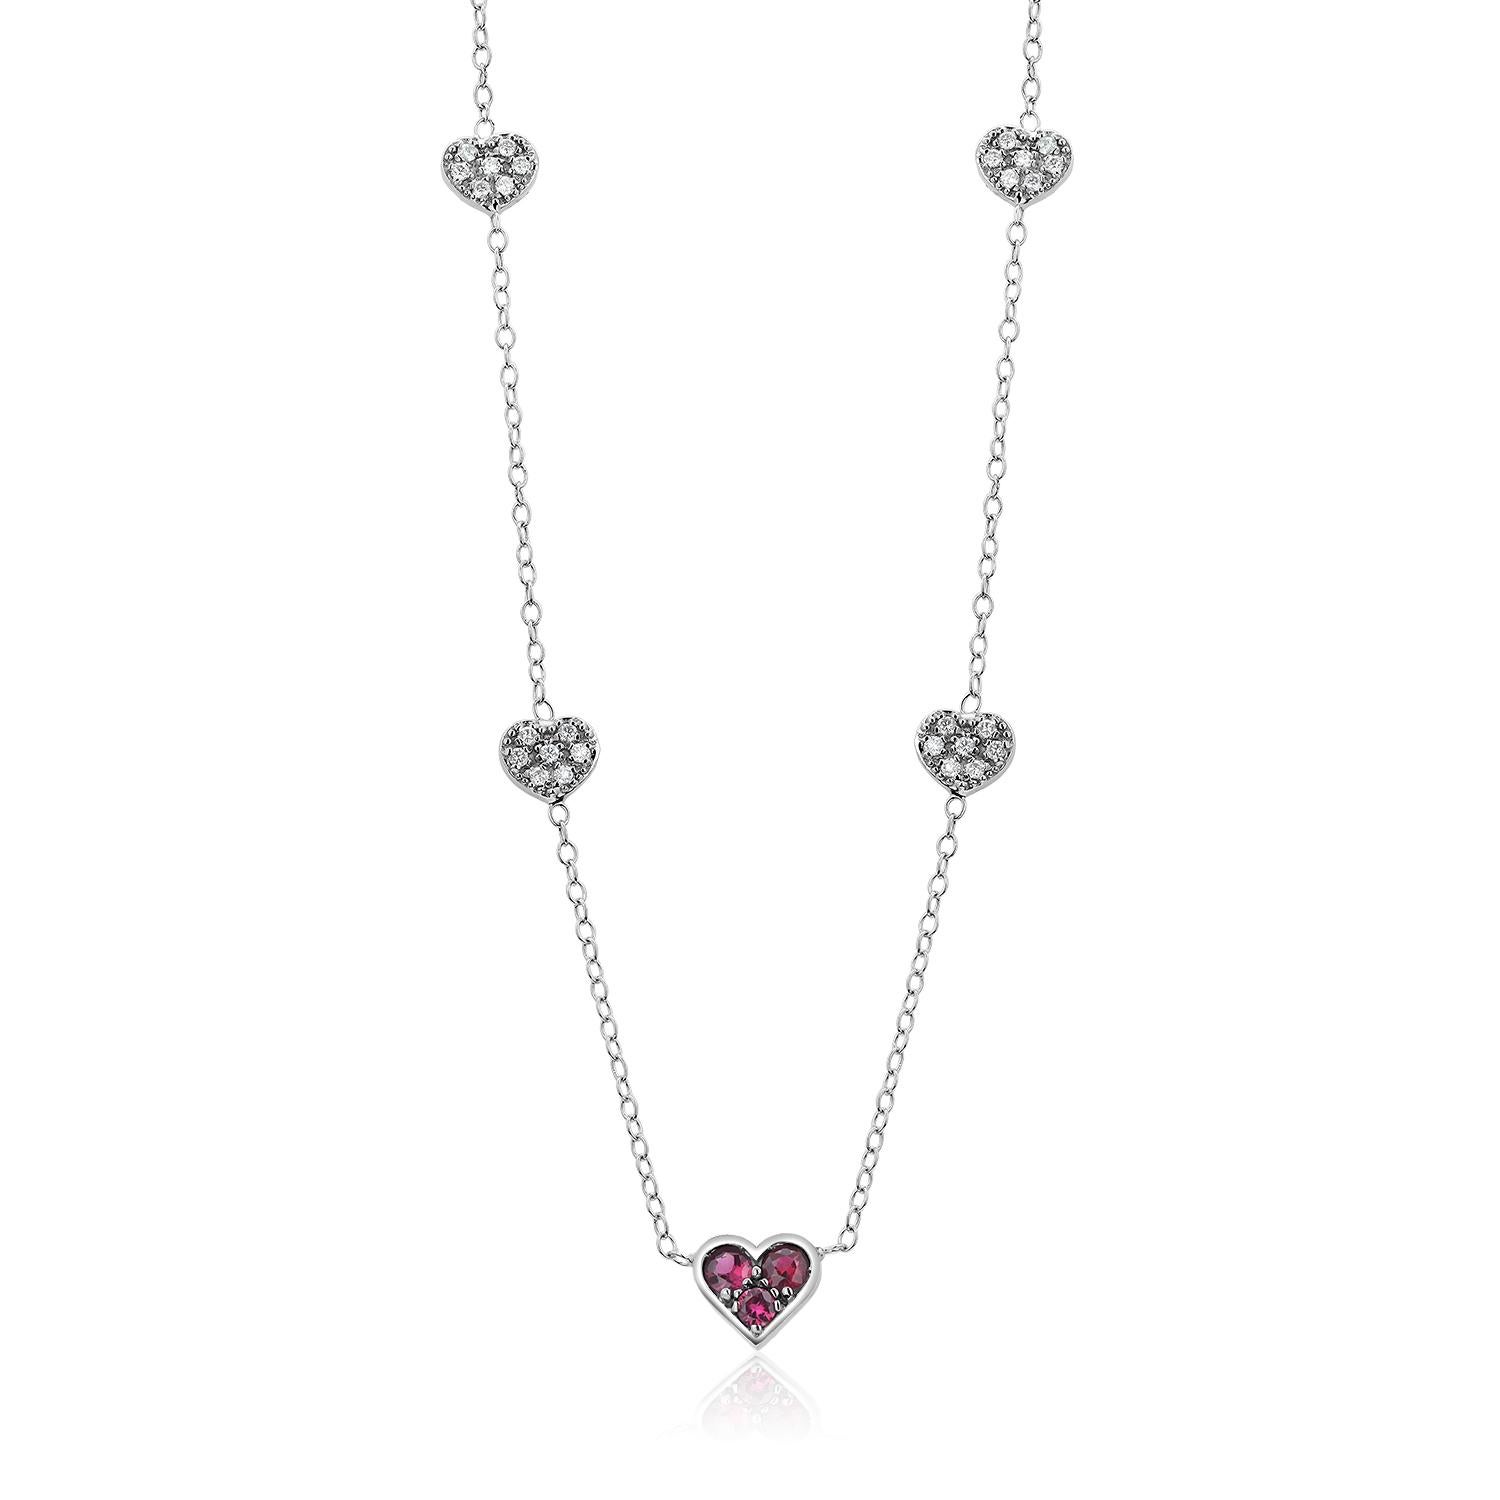 Modernist White Gold Heart Shaped Ruby Charm and Five Diamond Station Charms Neck